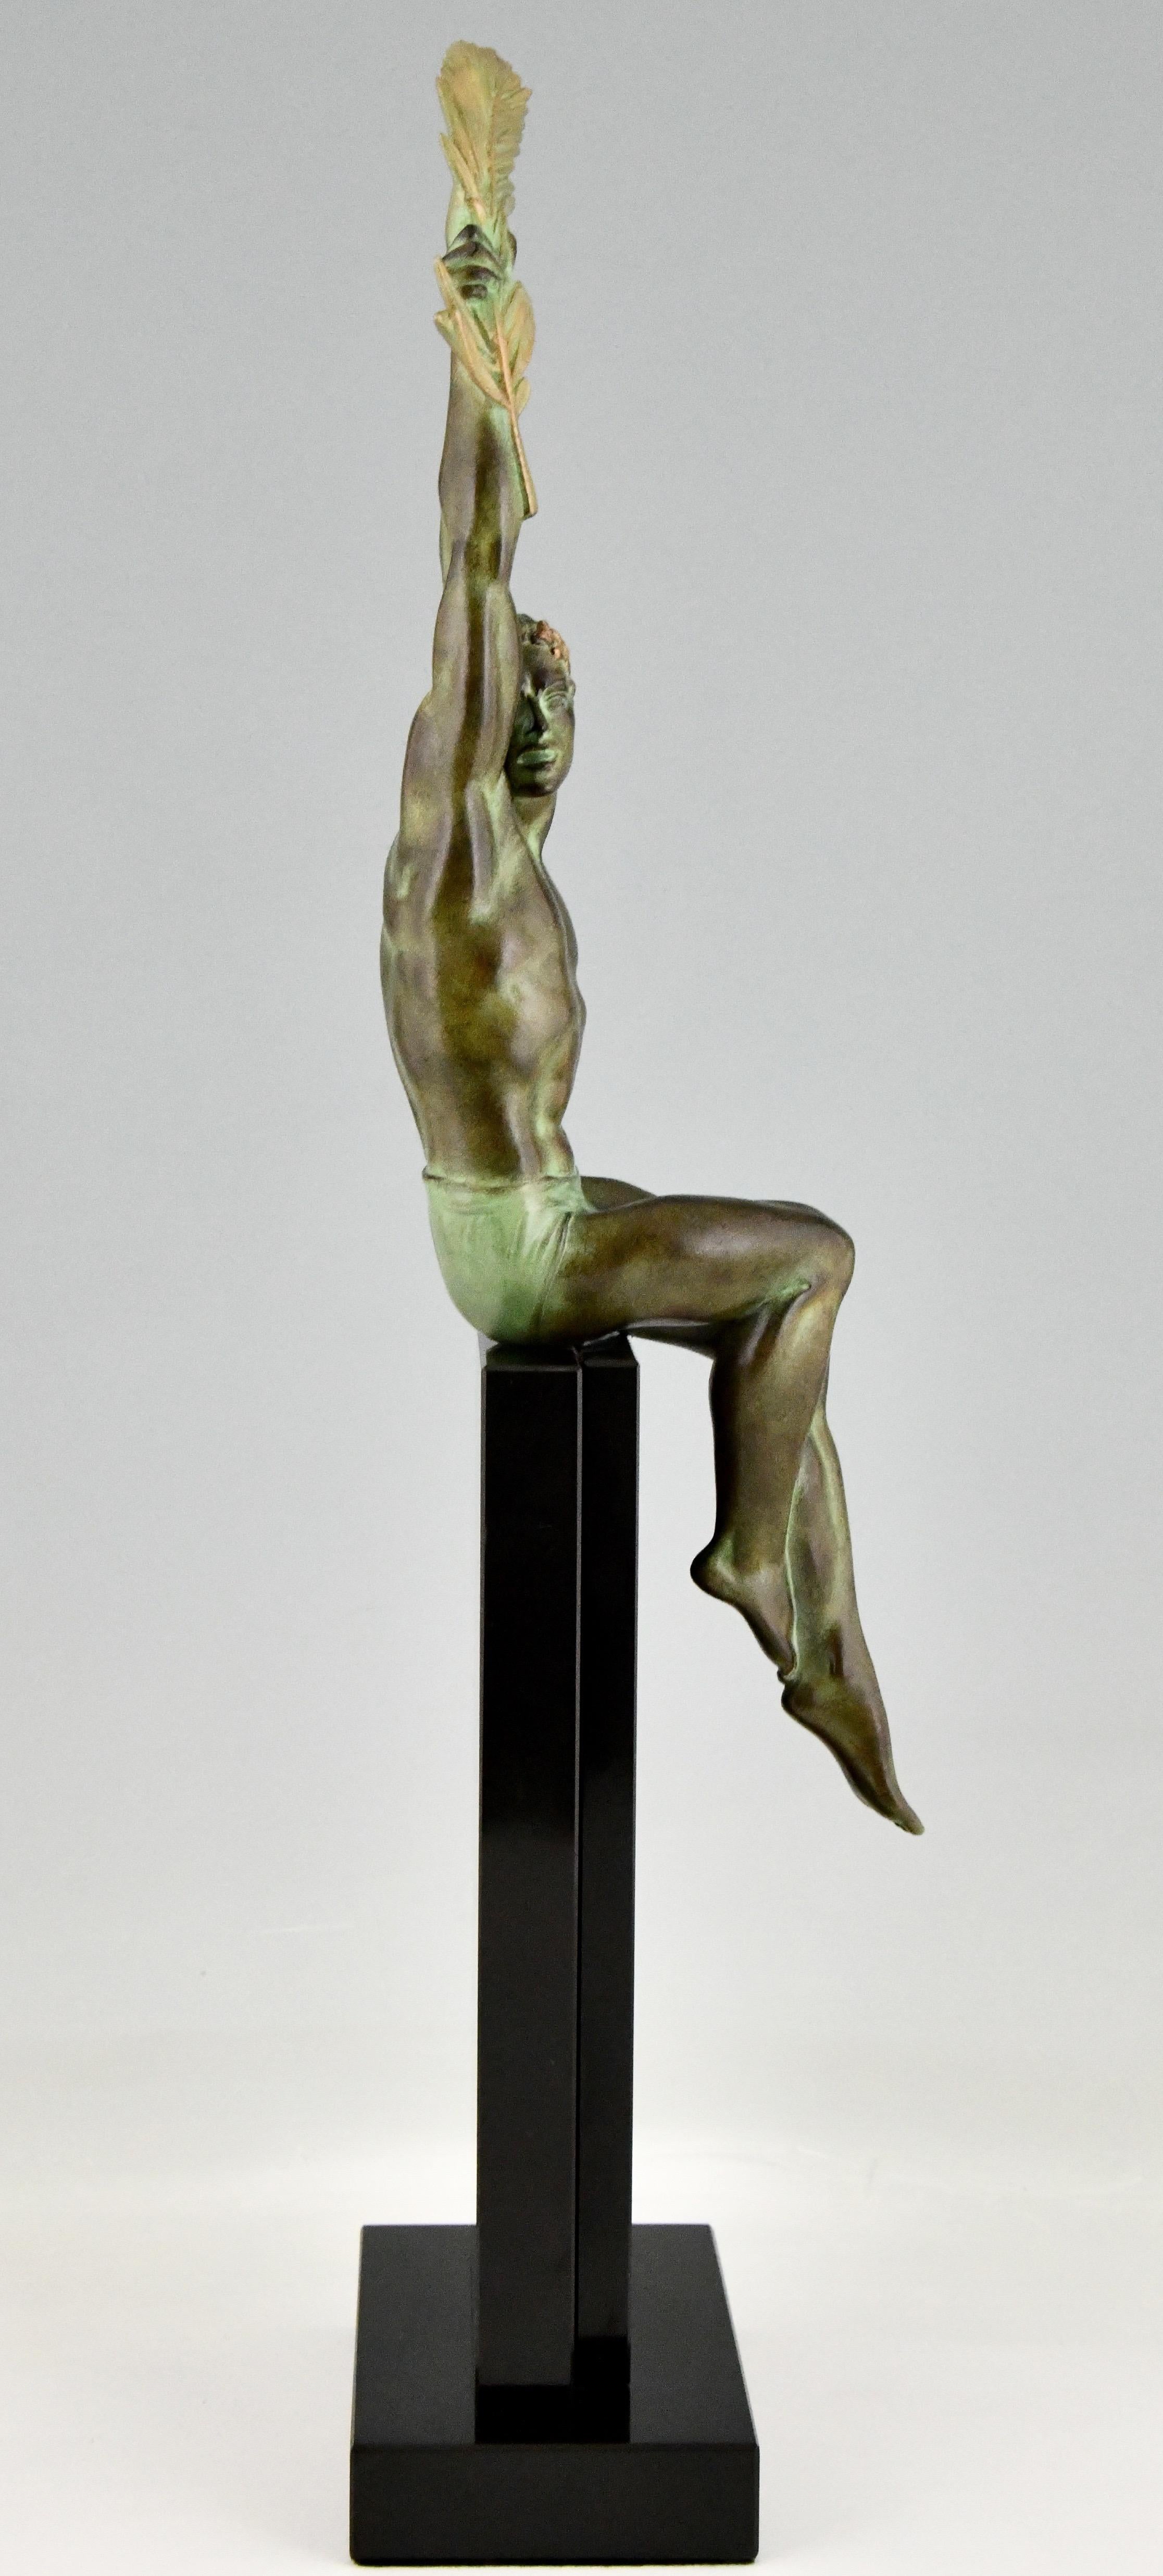 Patinated Art Deco Style Sculpture Athlete with Palm Leaf by Max Le Verrier, Victory